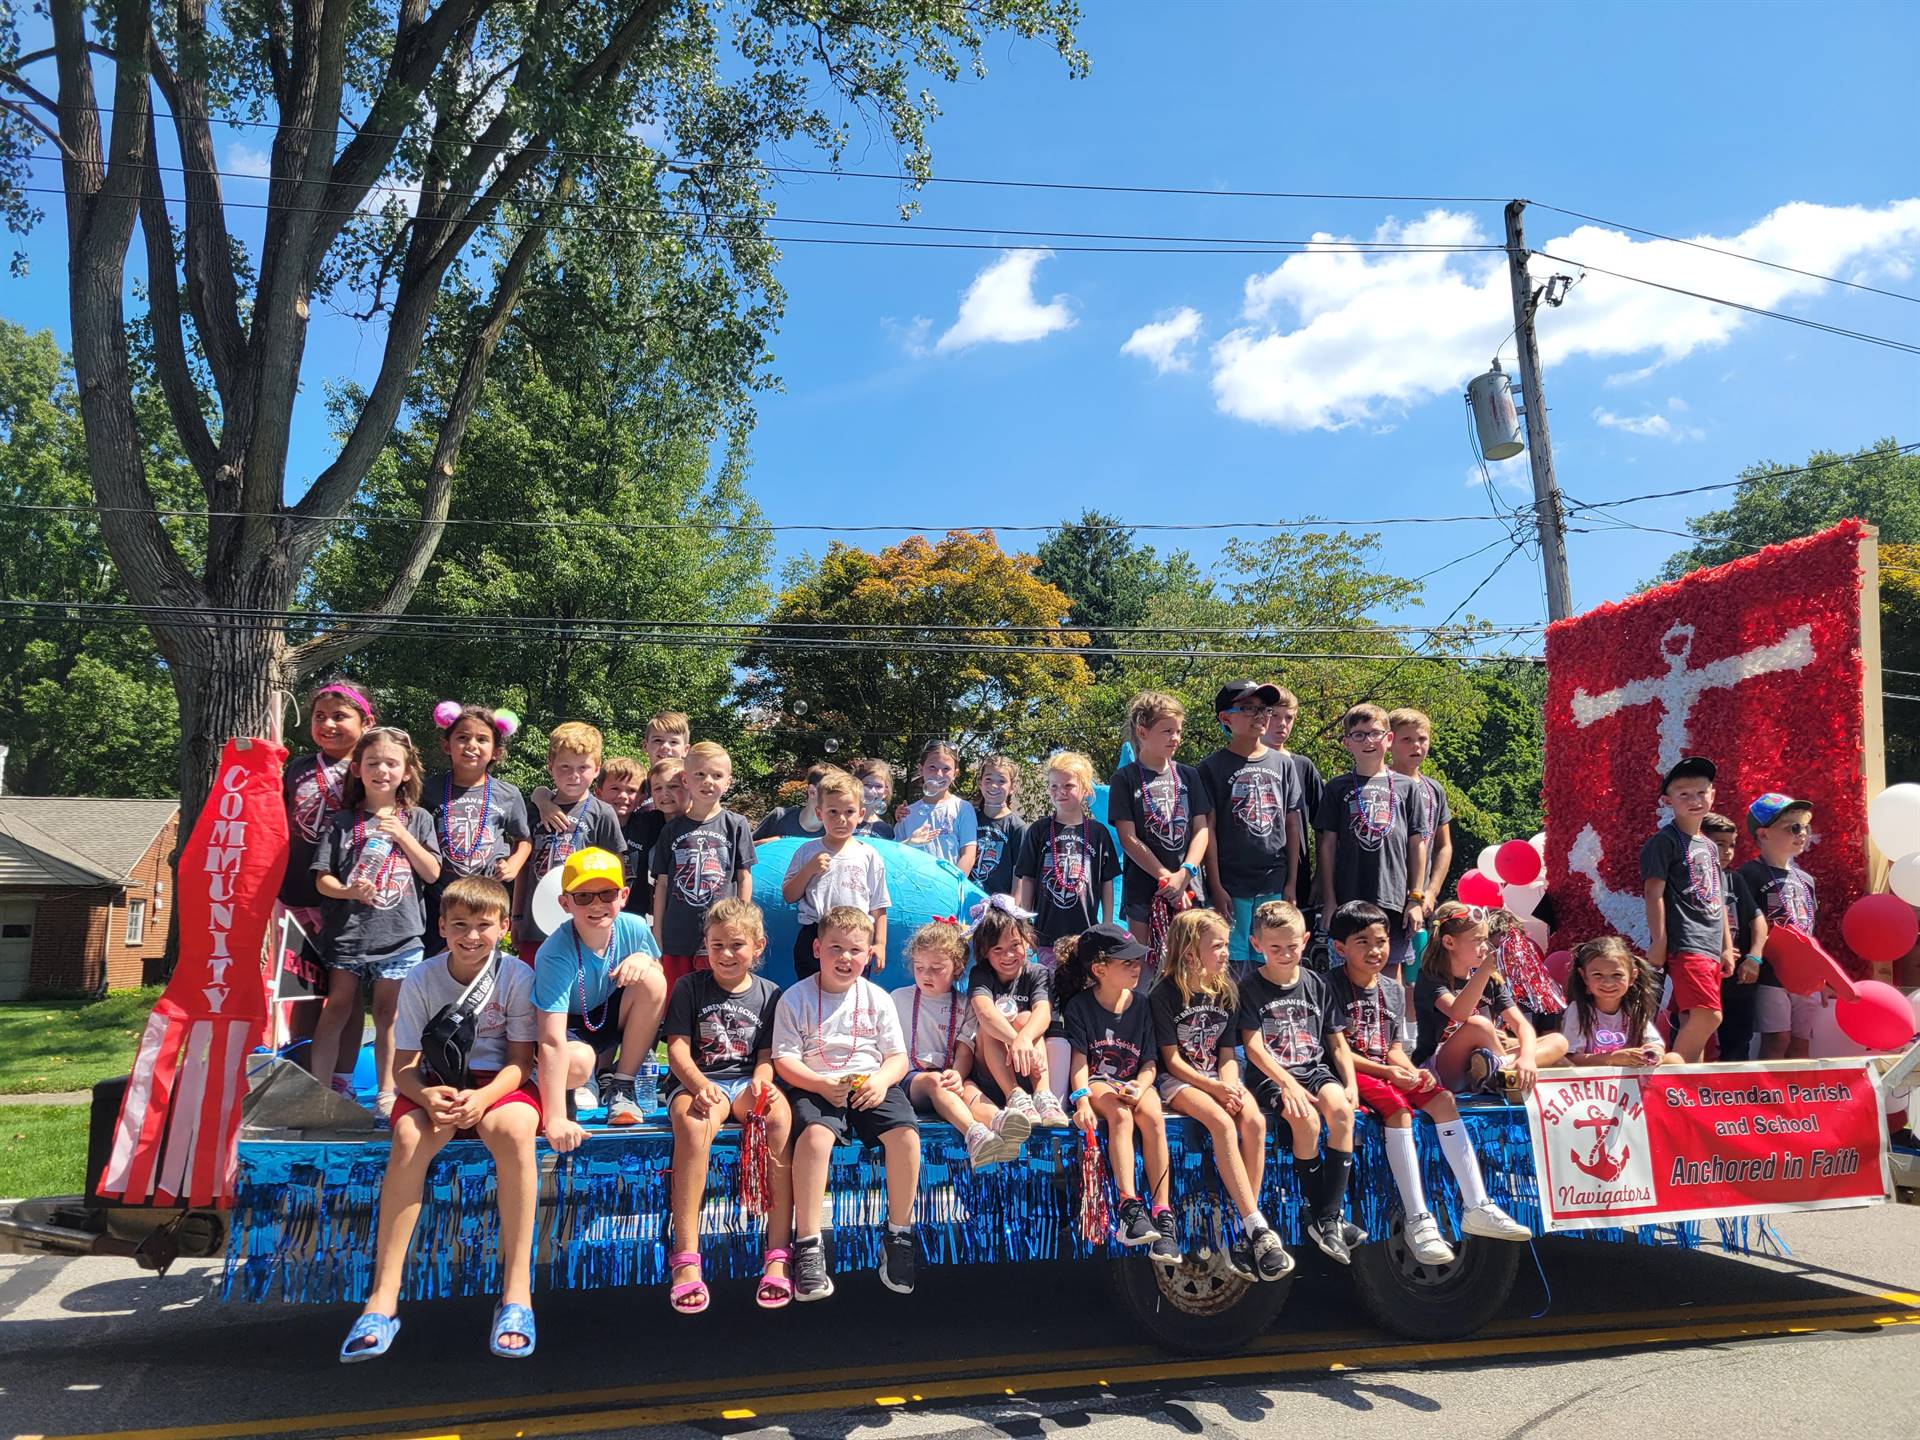 St. Brendan Families walk in the North Olmsted Homedays parade